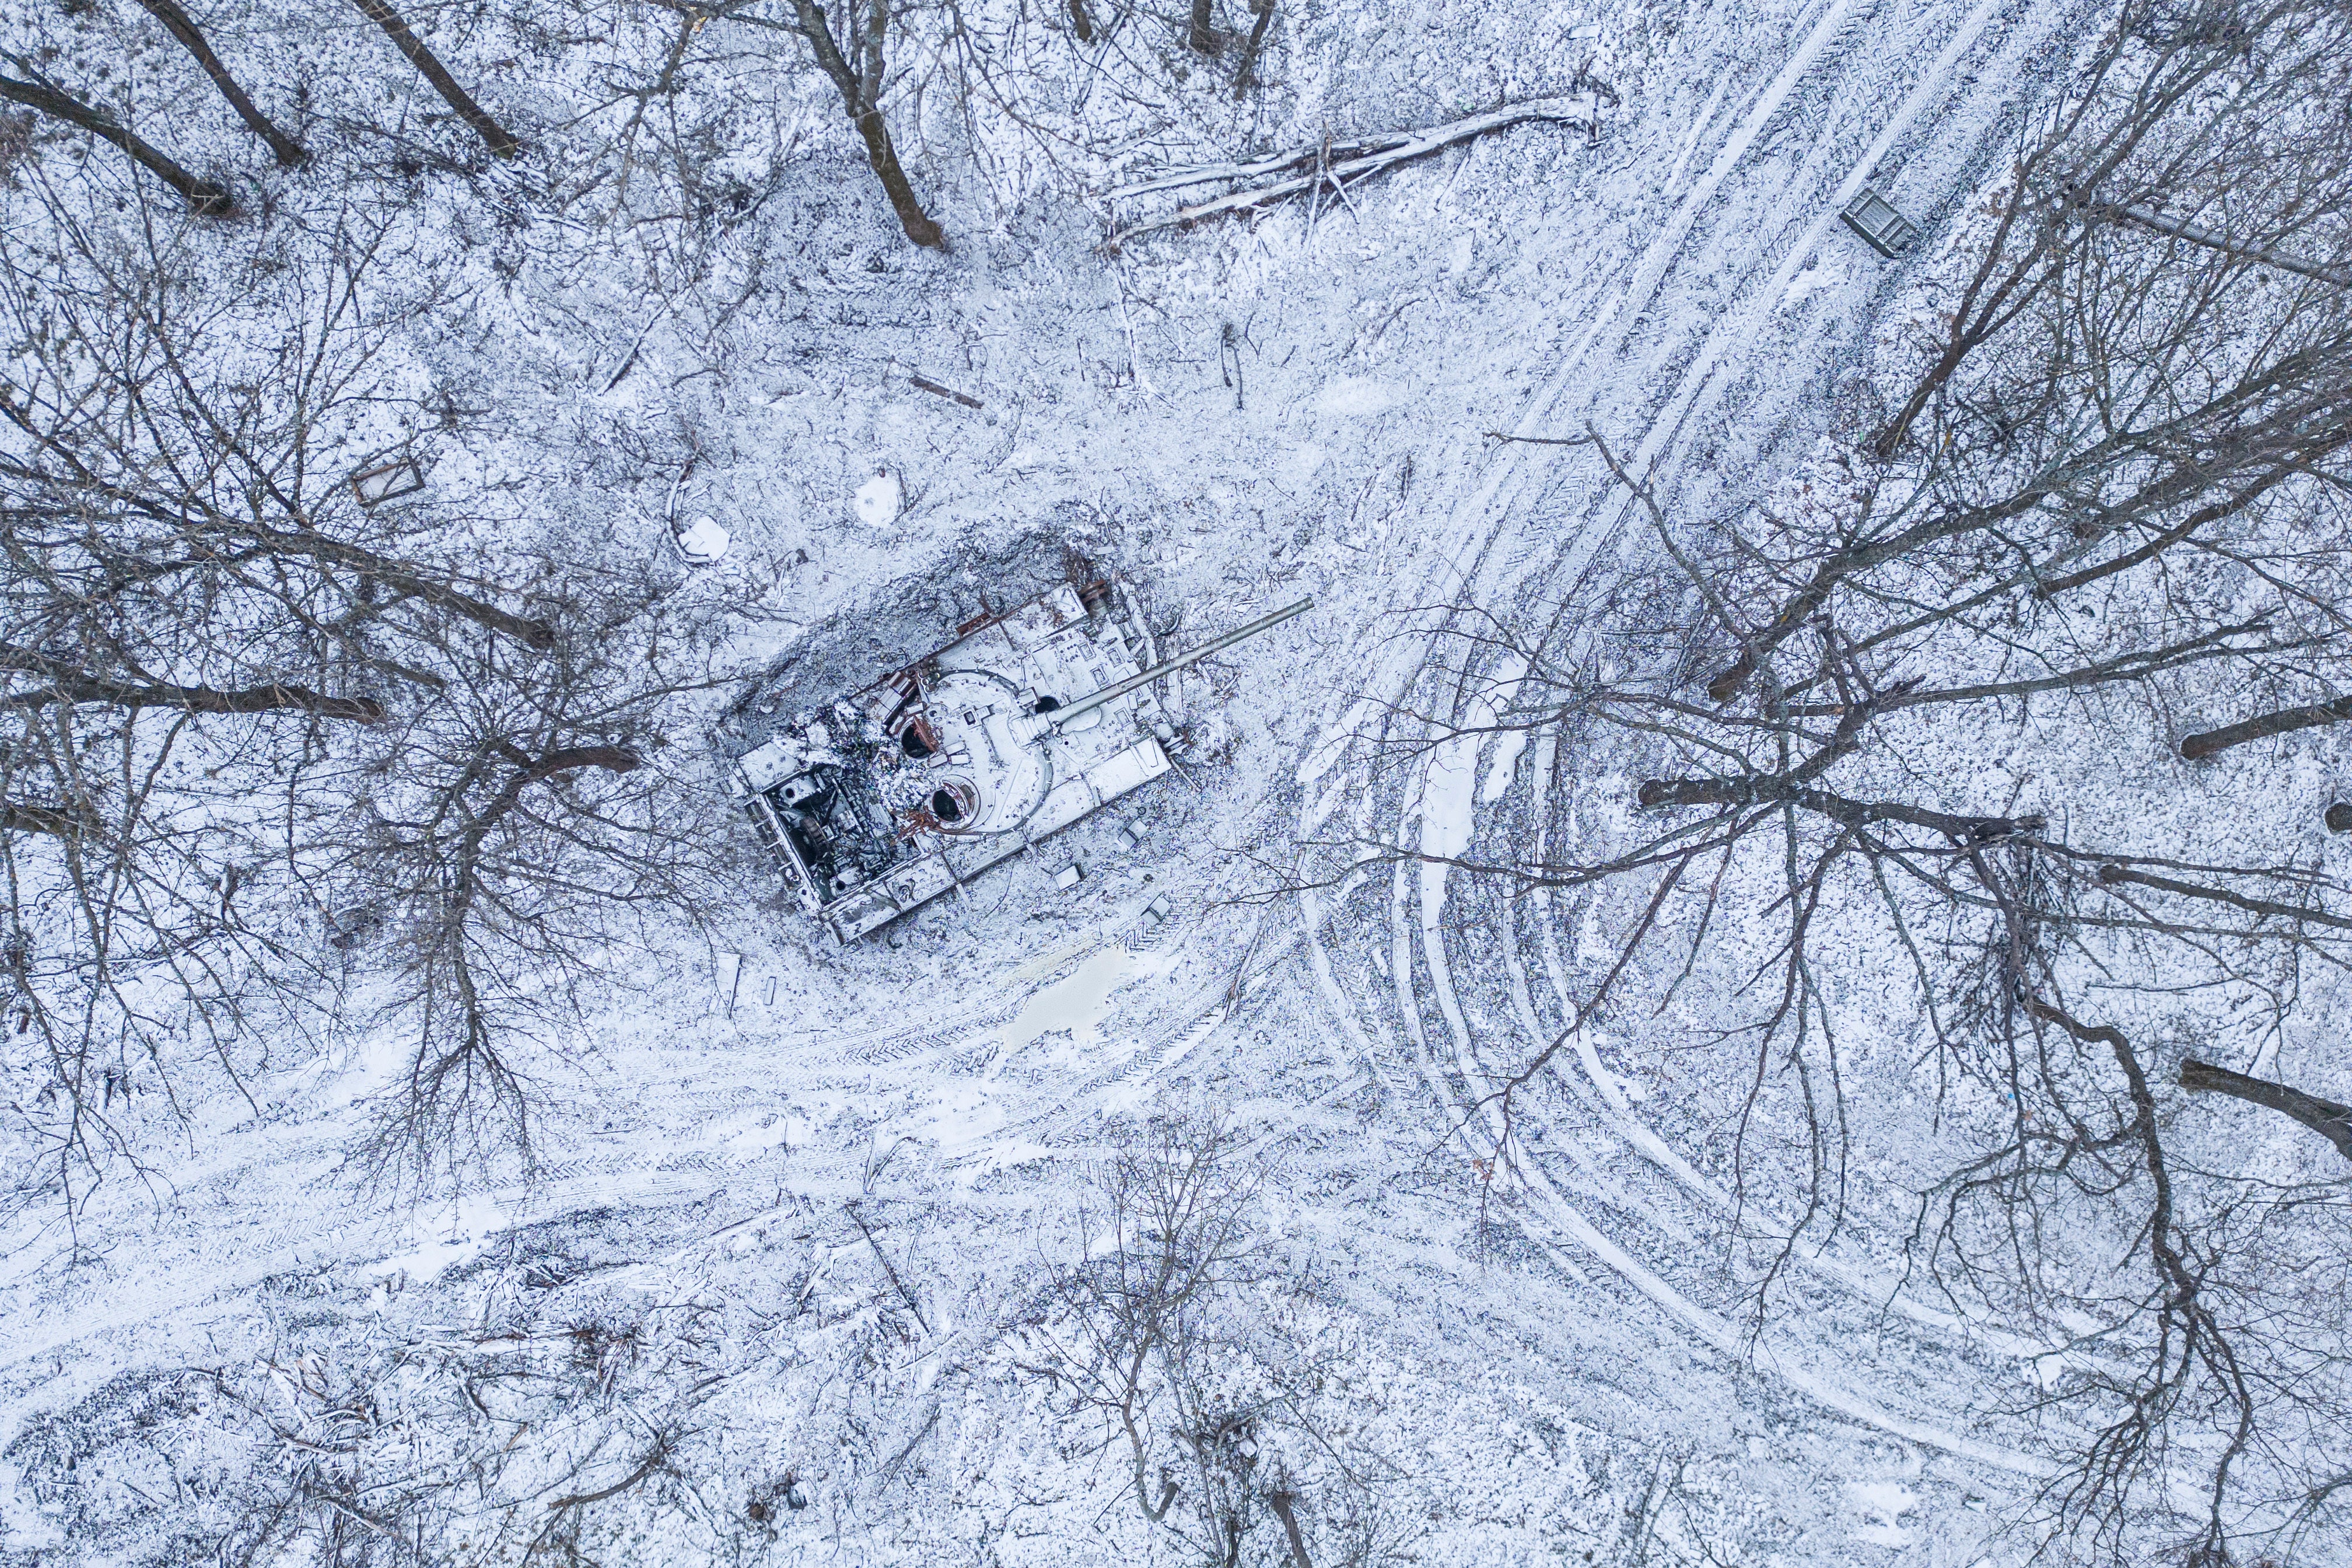 A destroyed Russian tank covered by snow stands in a forest in the Kharkiv region